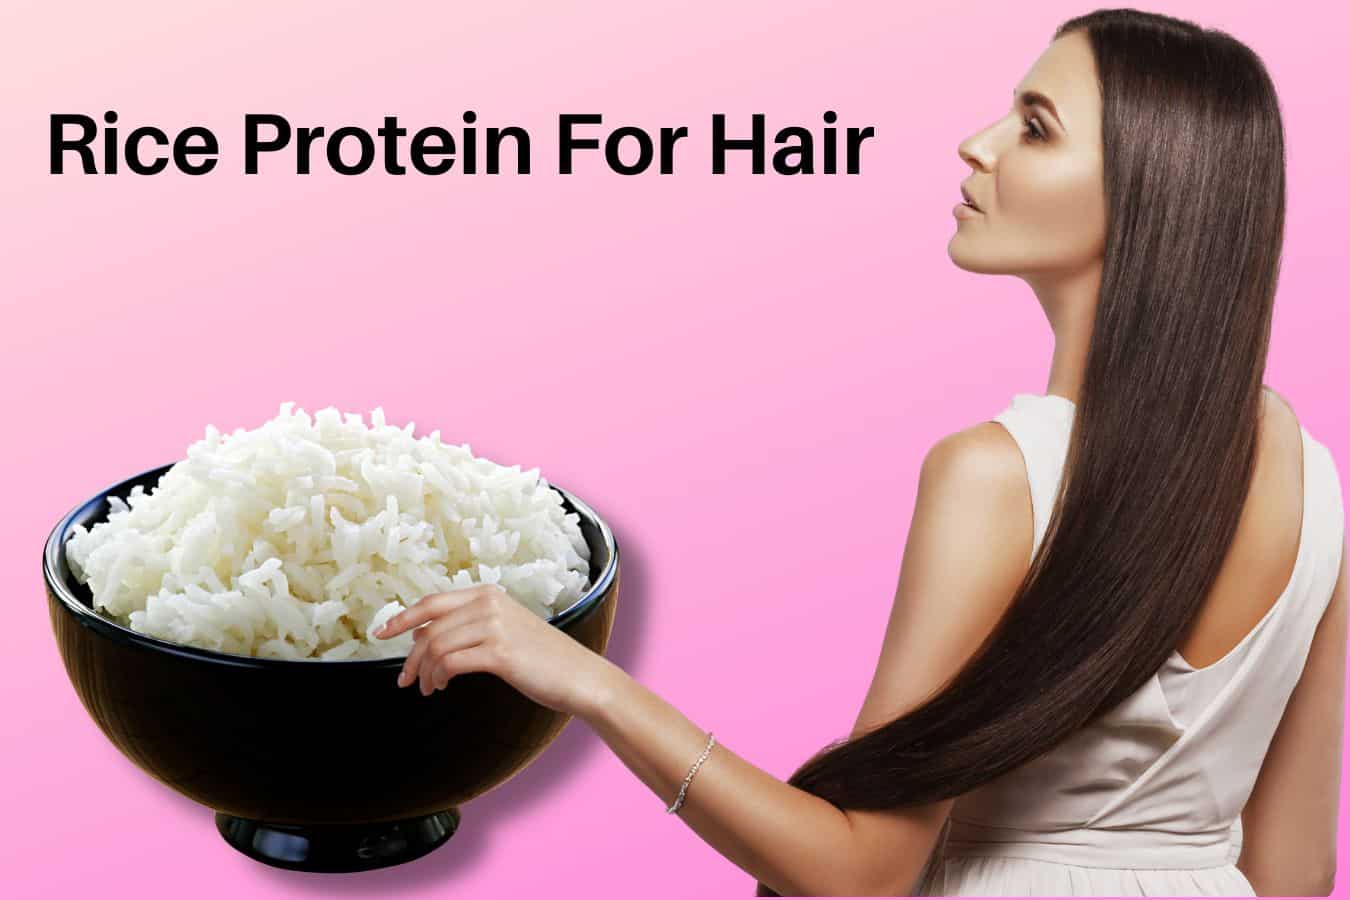 Rice Protein For Hair